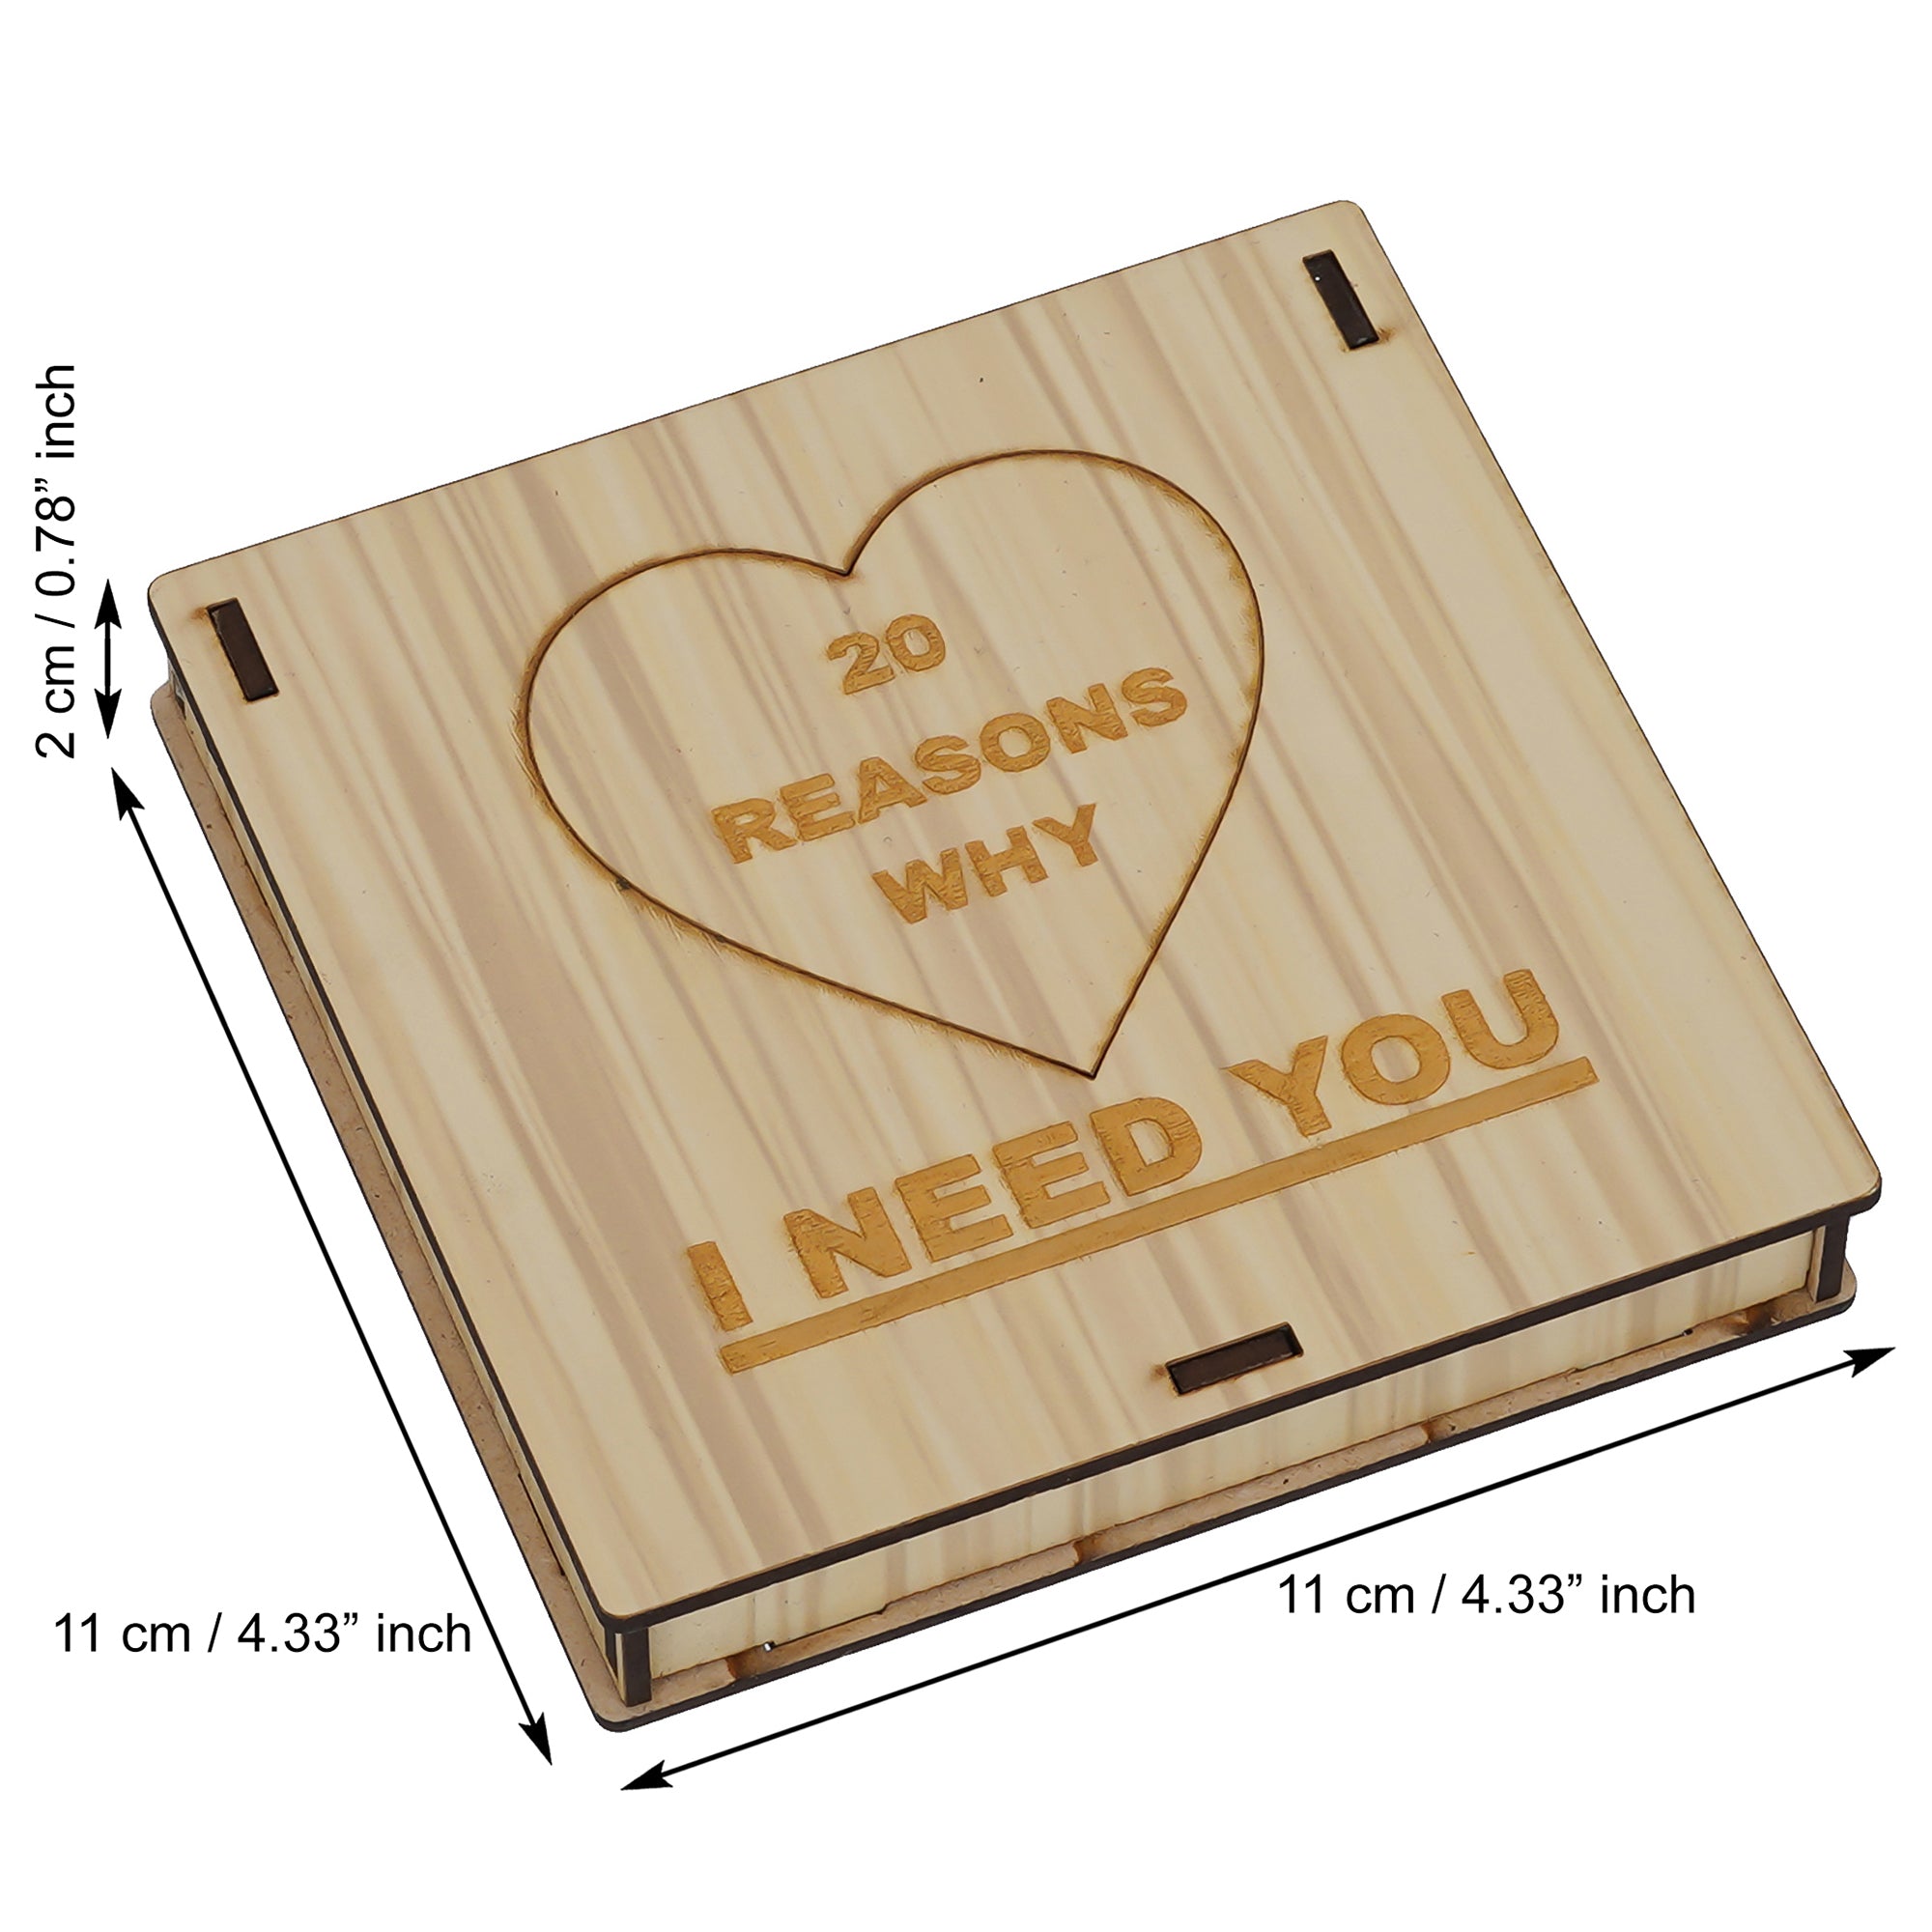 Valentine Combo of Golden Rose Gift Set, "20 Reasons Why I Need You" Printed on Little Hearts Wooden Gift Set 4